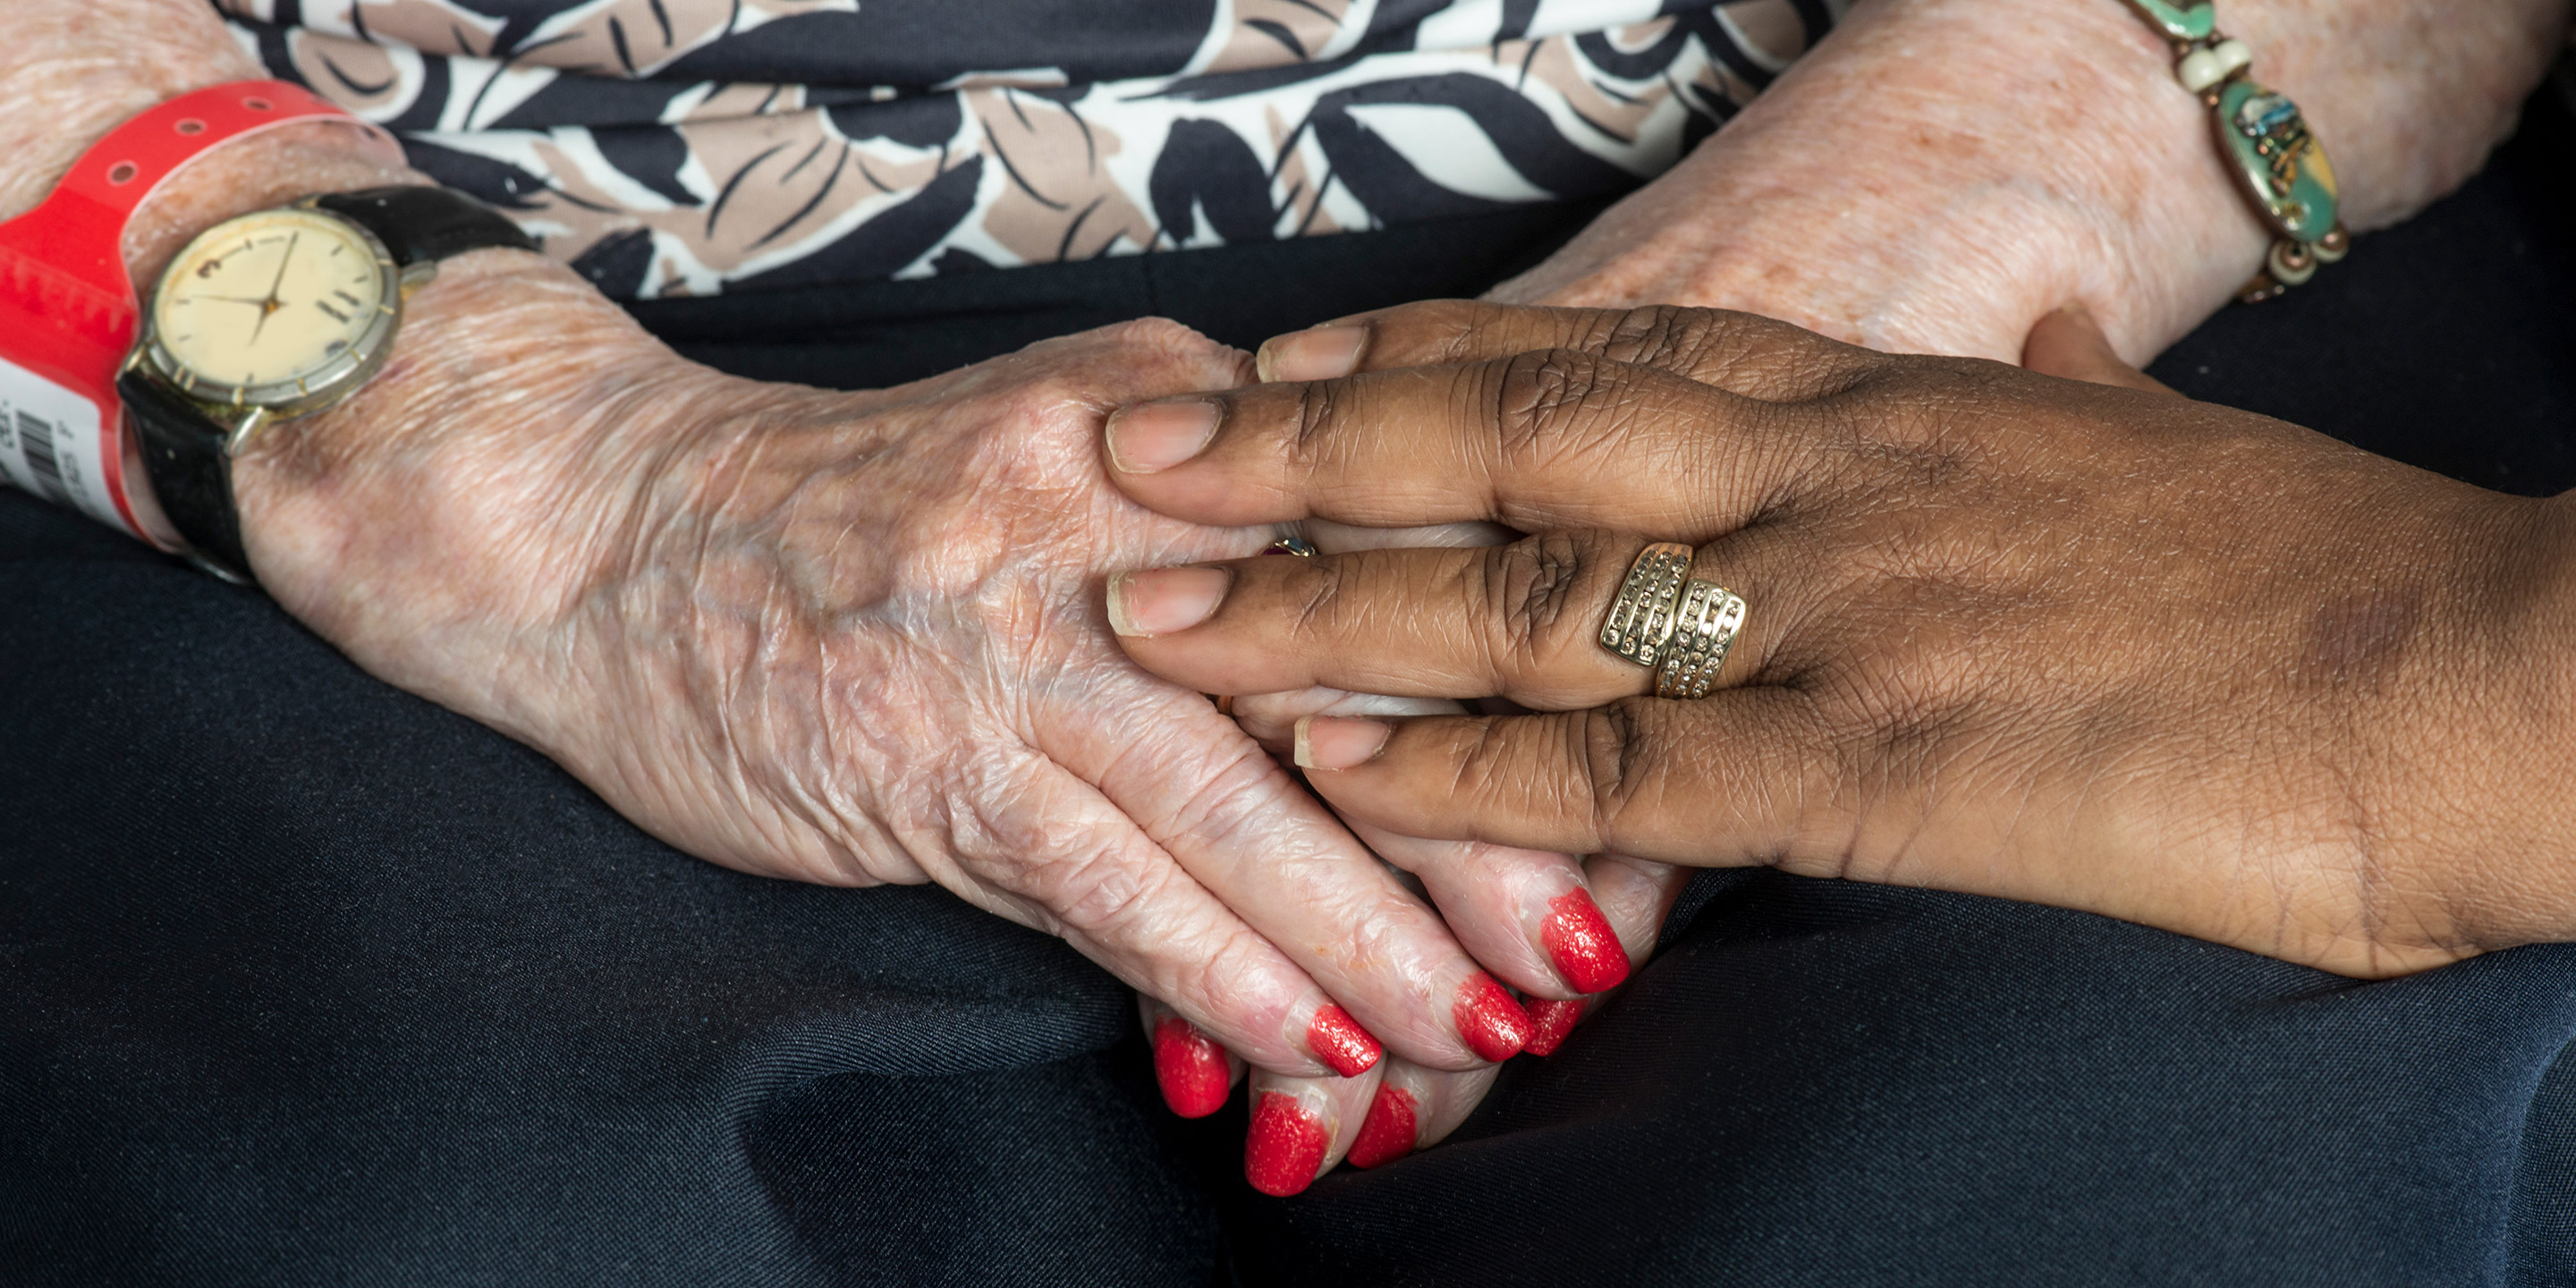 A close up of two female hands